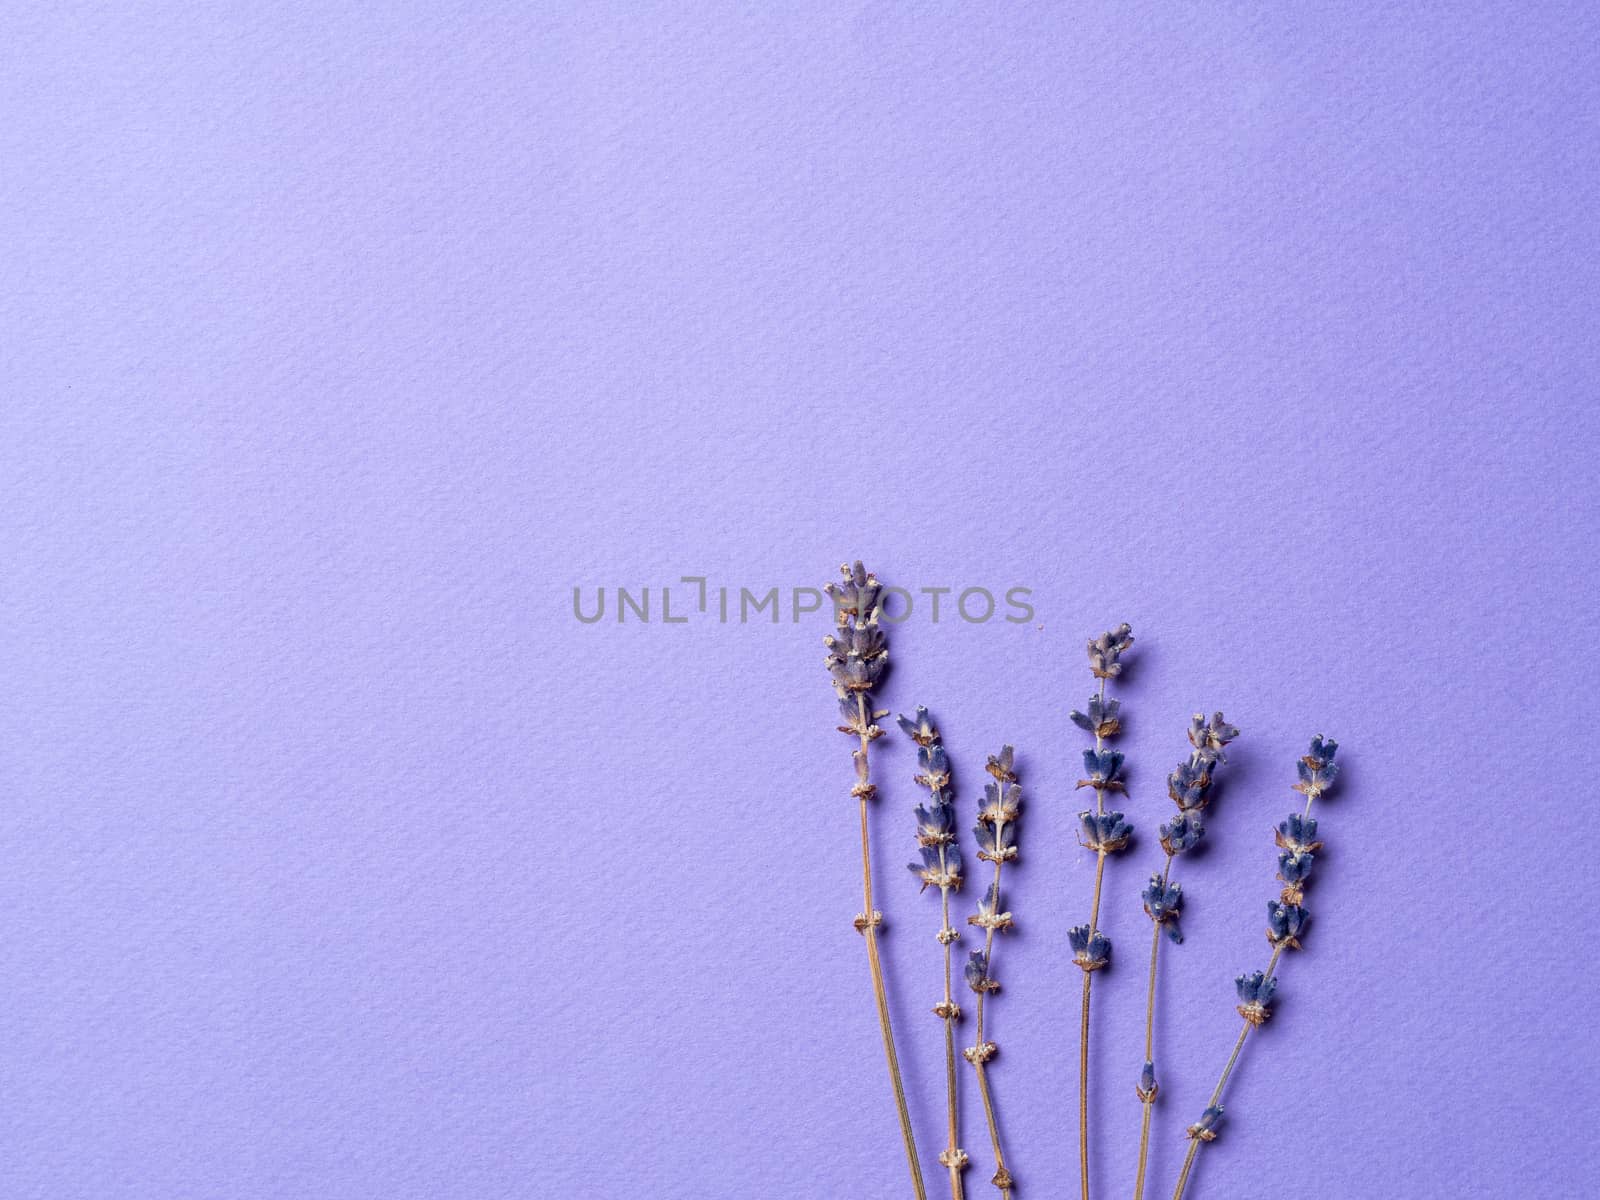 violet lavender flowers arranged on bright purple background. Top view, flat lay. Minimal concept. Copy space for text.